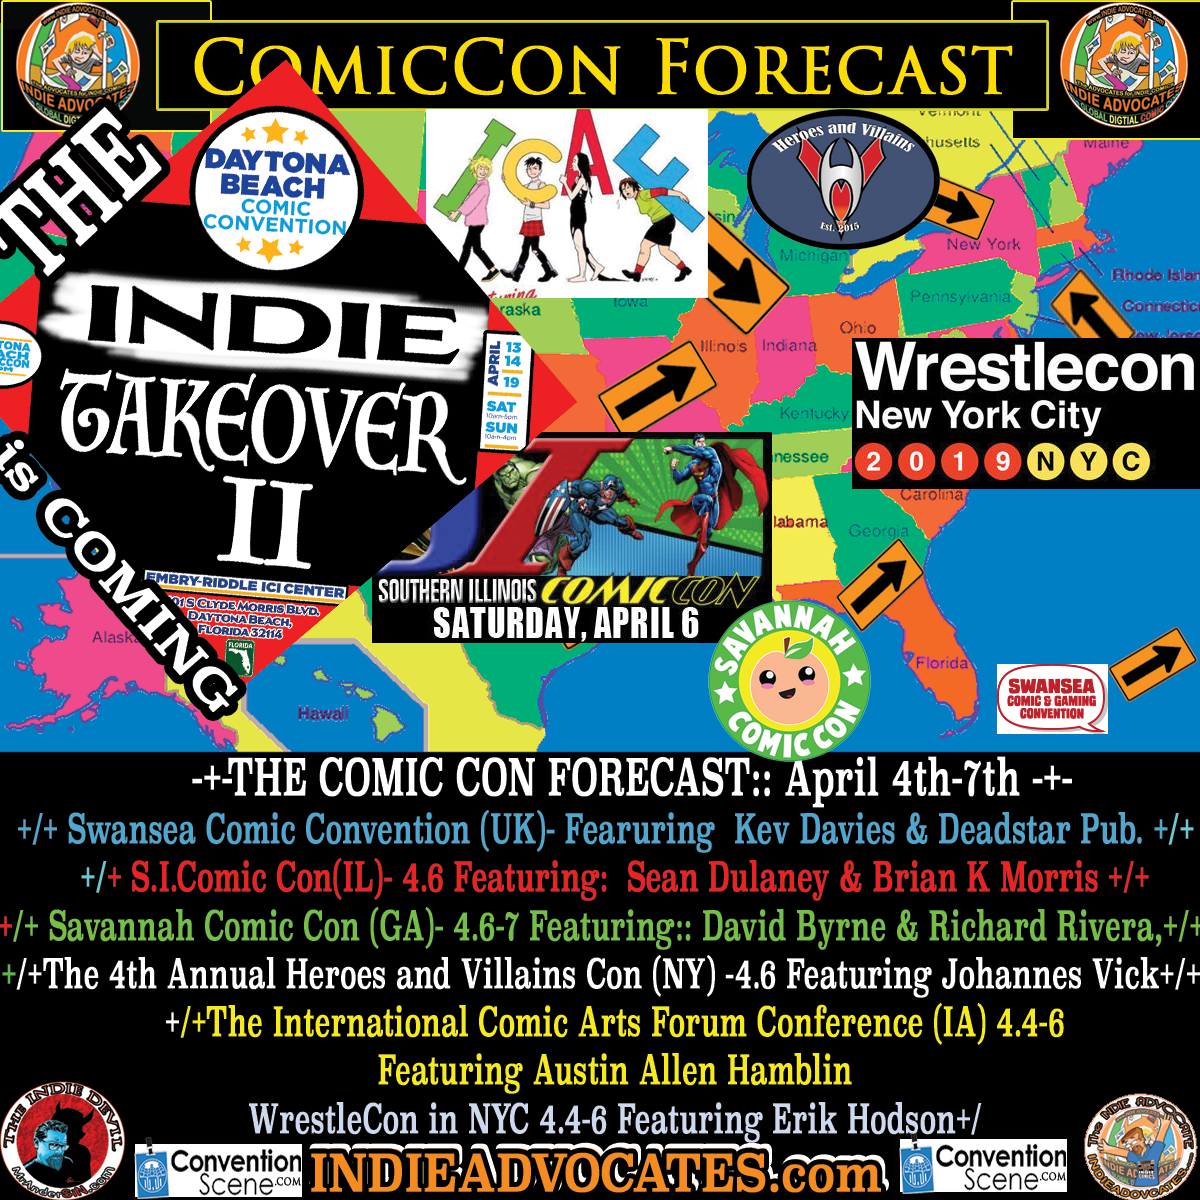 THE COMIC CON  FORECAST::  April 4th-7th::  Swansea Comic and Gaming Convention (UK)- Fearuring  Kev Davies & Deadstar Pub. +/+ S.I.Comic Con(IL)- 4.6 Featuring:  Nathan Bonner, Sean Dulaney, Cathy Jackson,  Brad Moore, Brian K Morris +/+ Savannah Comic Con (GA)- 4.6-7 Featuring:: David Byrne &  Richard Rivera +/+The 4th Annual Heroes and Villains Con (NY) -4.6 Featuring Johannes Vick +/+ The International Comic Arts Forum Conference (IA) 4.4-6 Featuring Austin Allen Hamblin+/+ WrestleCon in NYC 4.4-6 Featuring Erik Hodson+/+